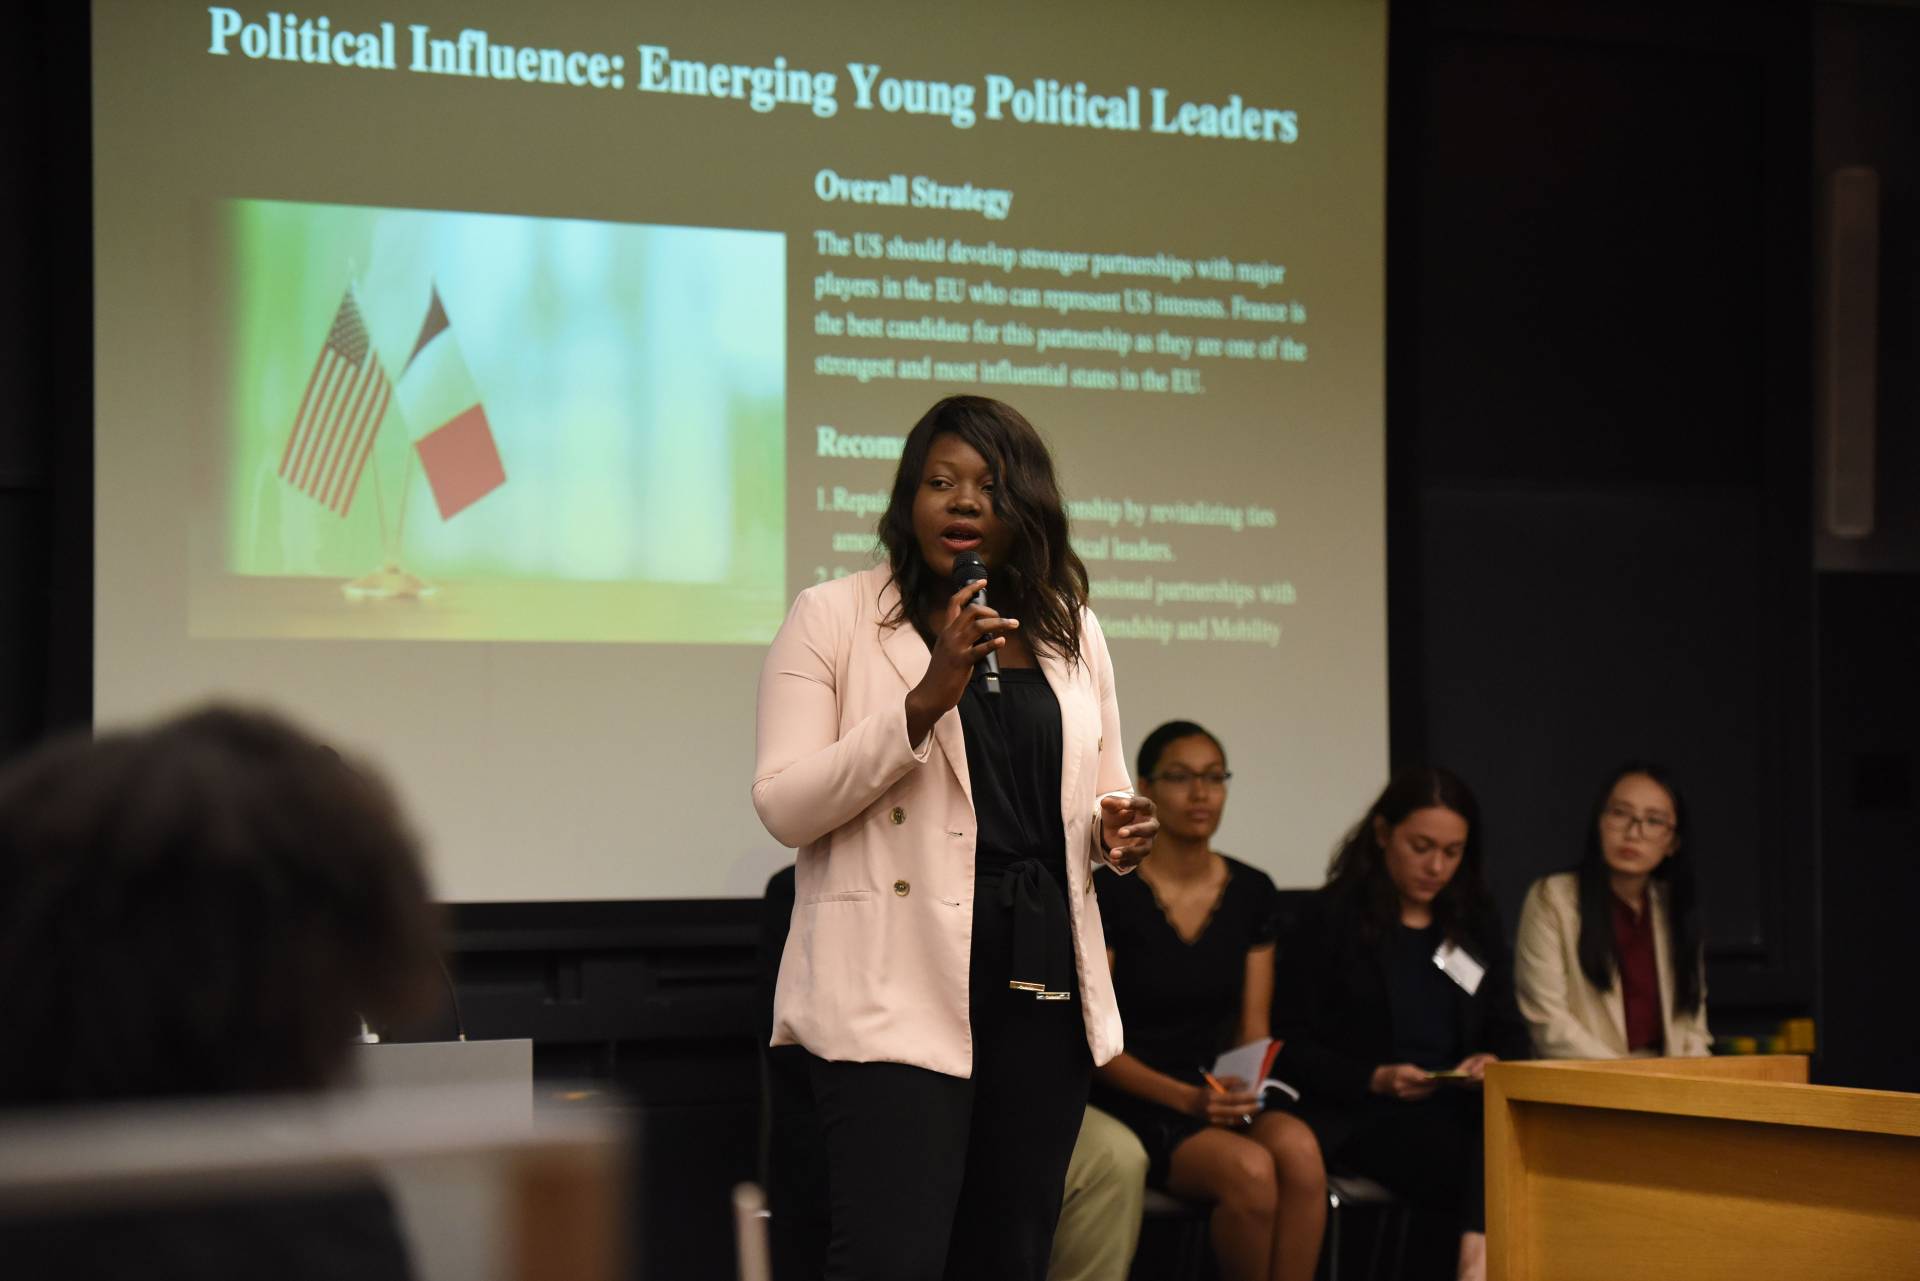 A woman speaks to an auditorium-style classroom full of undergraduates in front of a projection that reads: "Political Influence: Emerging Young Political Leaders" 